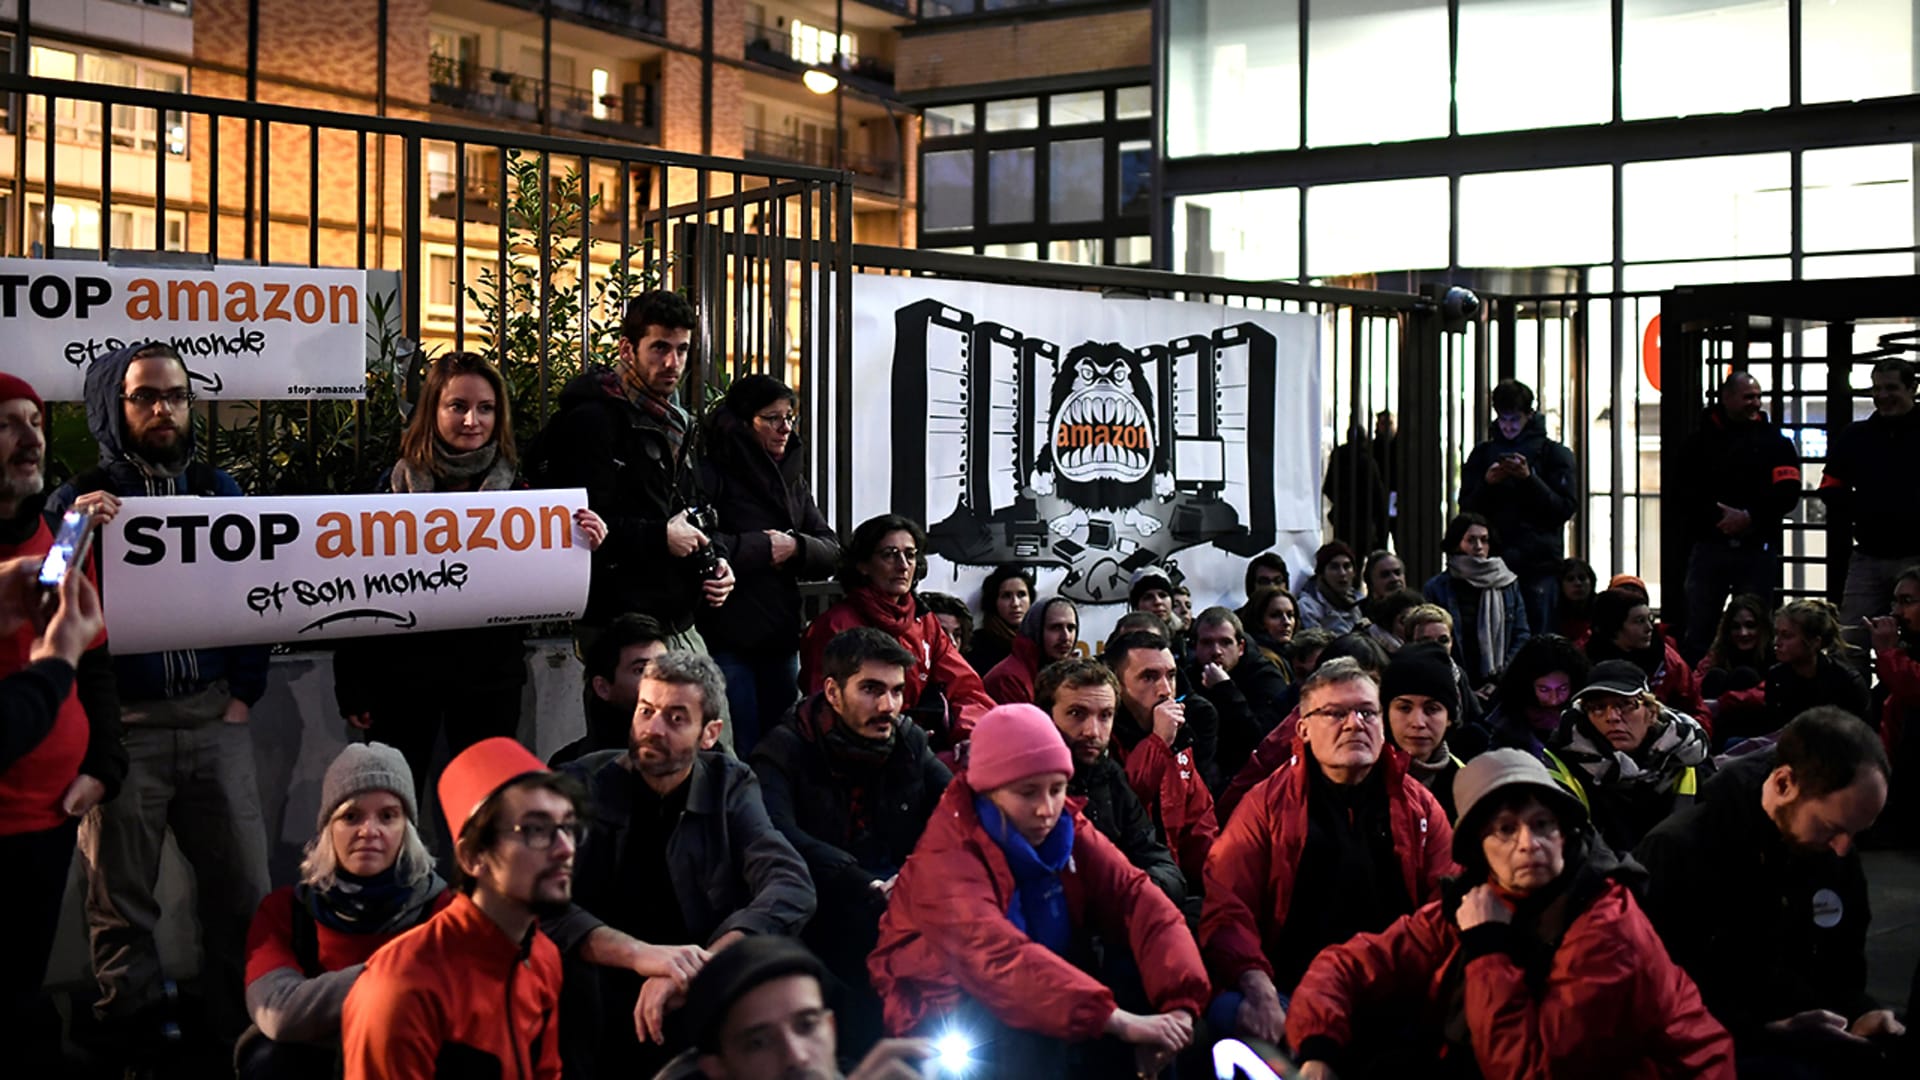 Black Friday protests: Climate change activists block access to Amazon distribution center